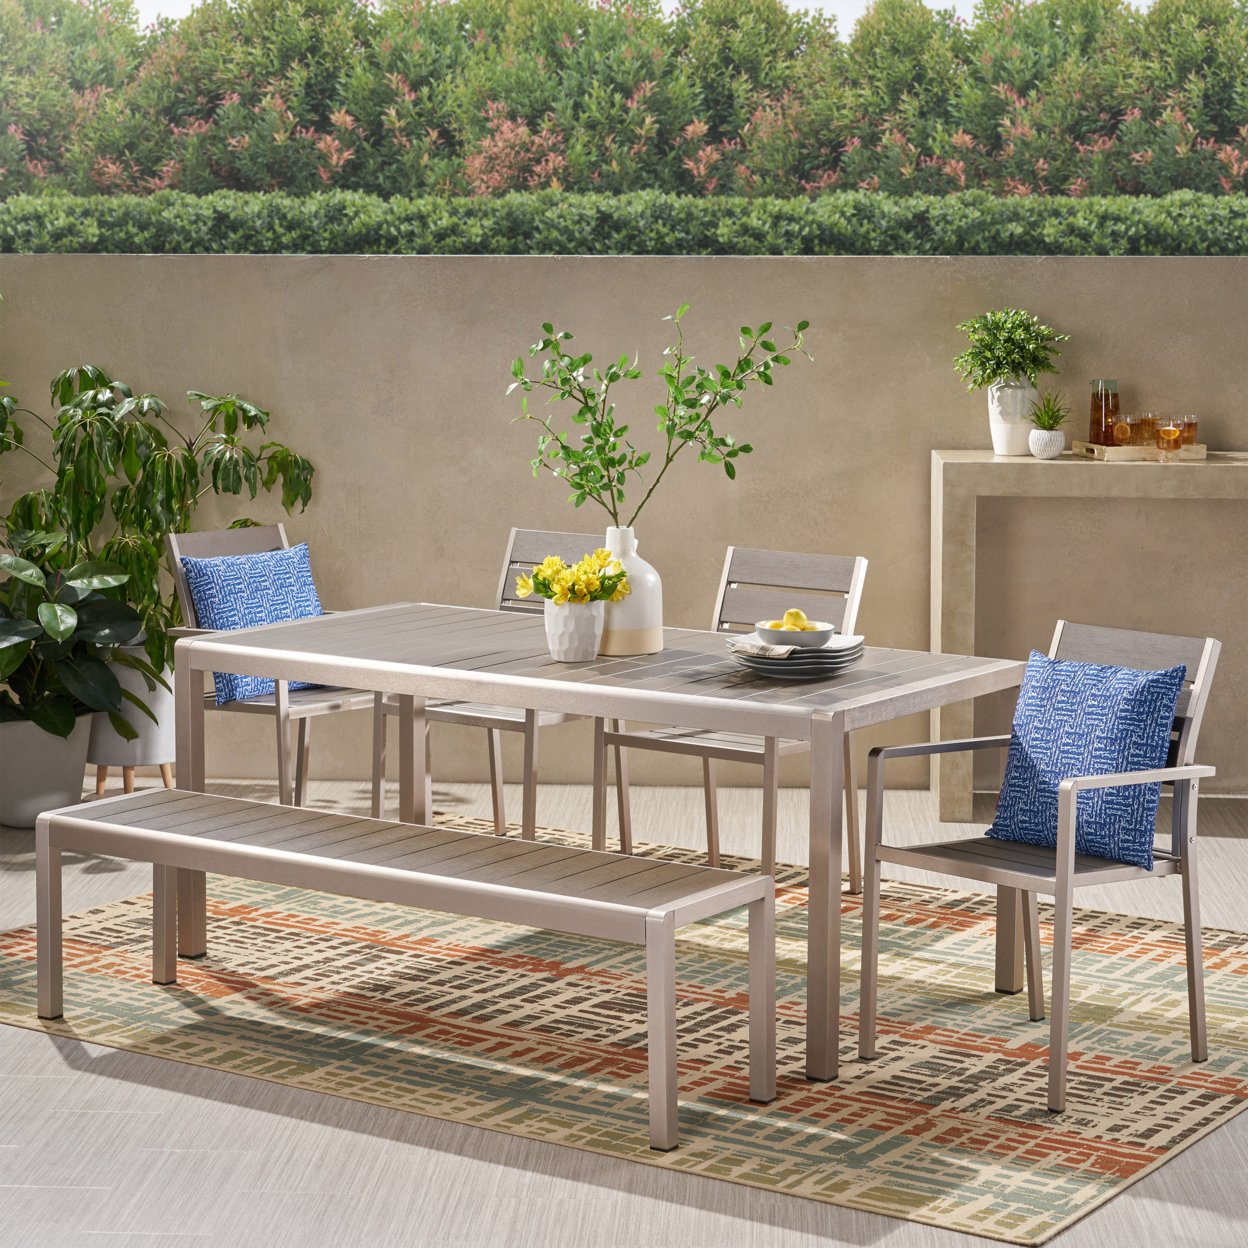 Tess Outdoor Modern Aluminum 6 Seater Dining Set With Dining Bench - Gray + Silver